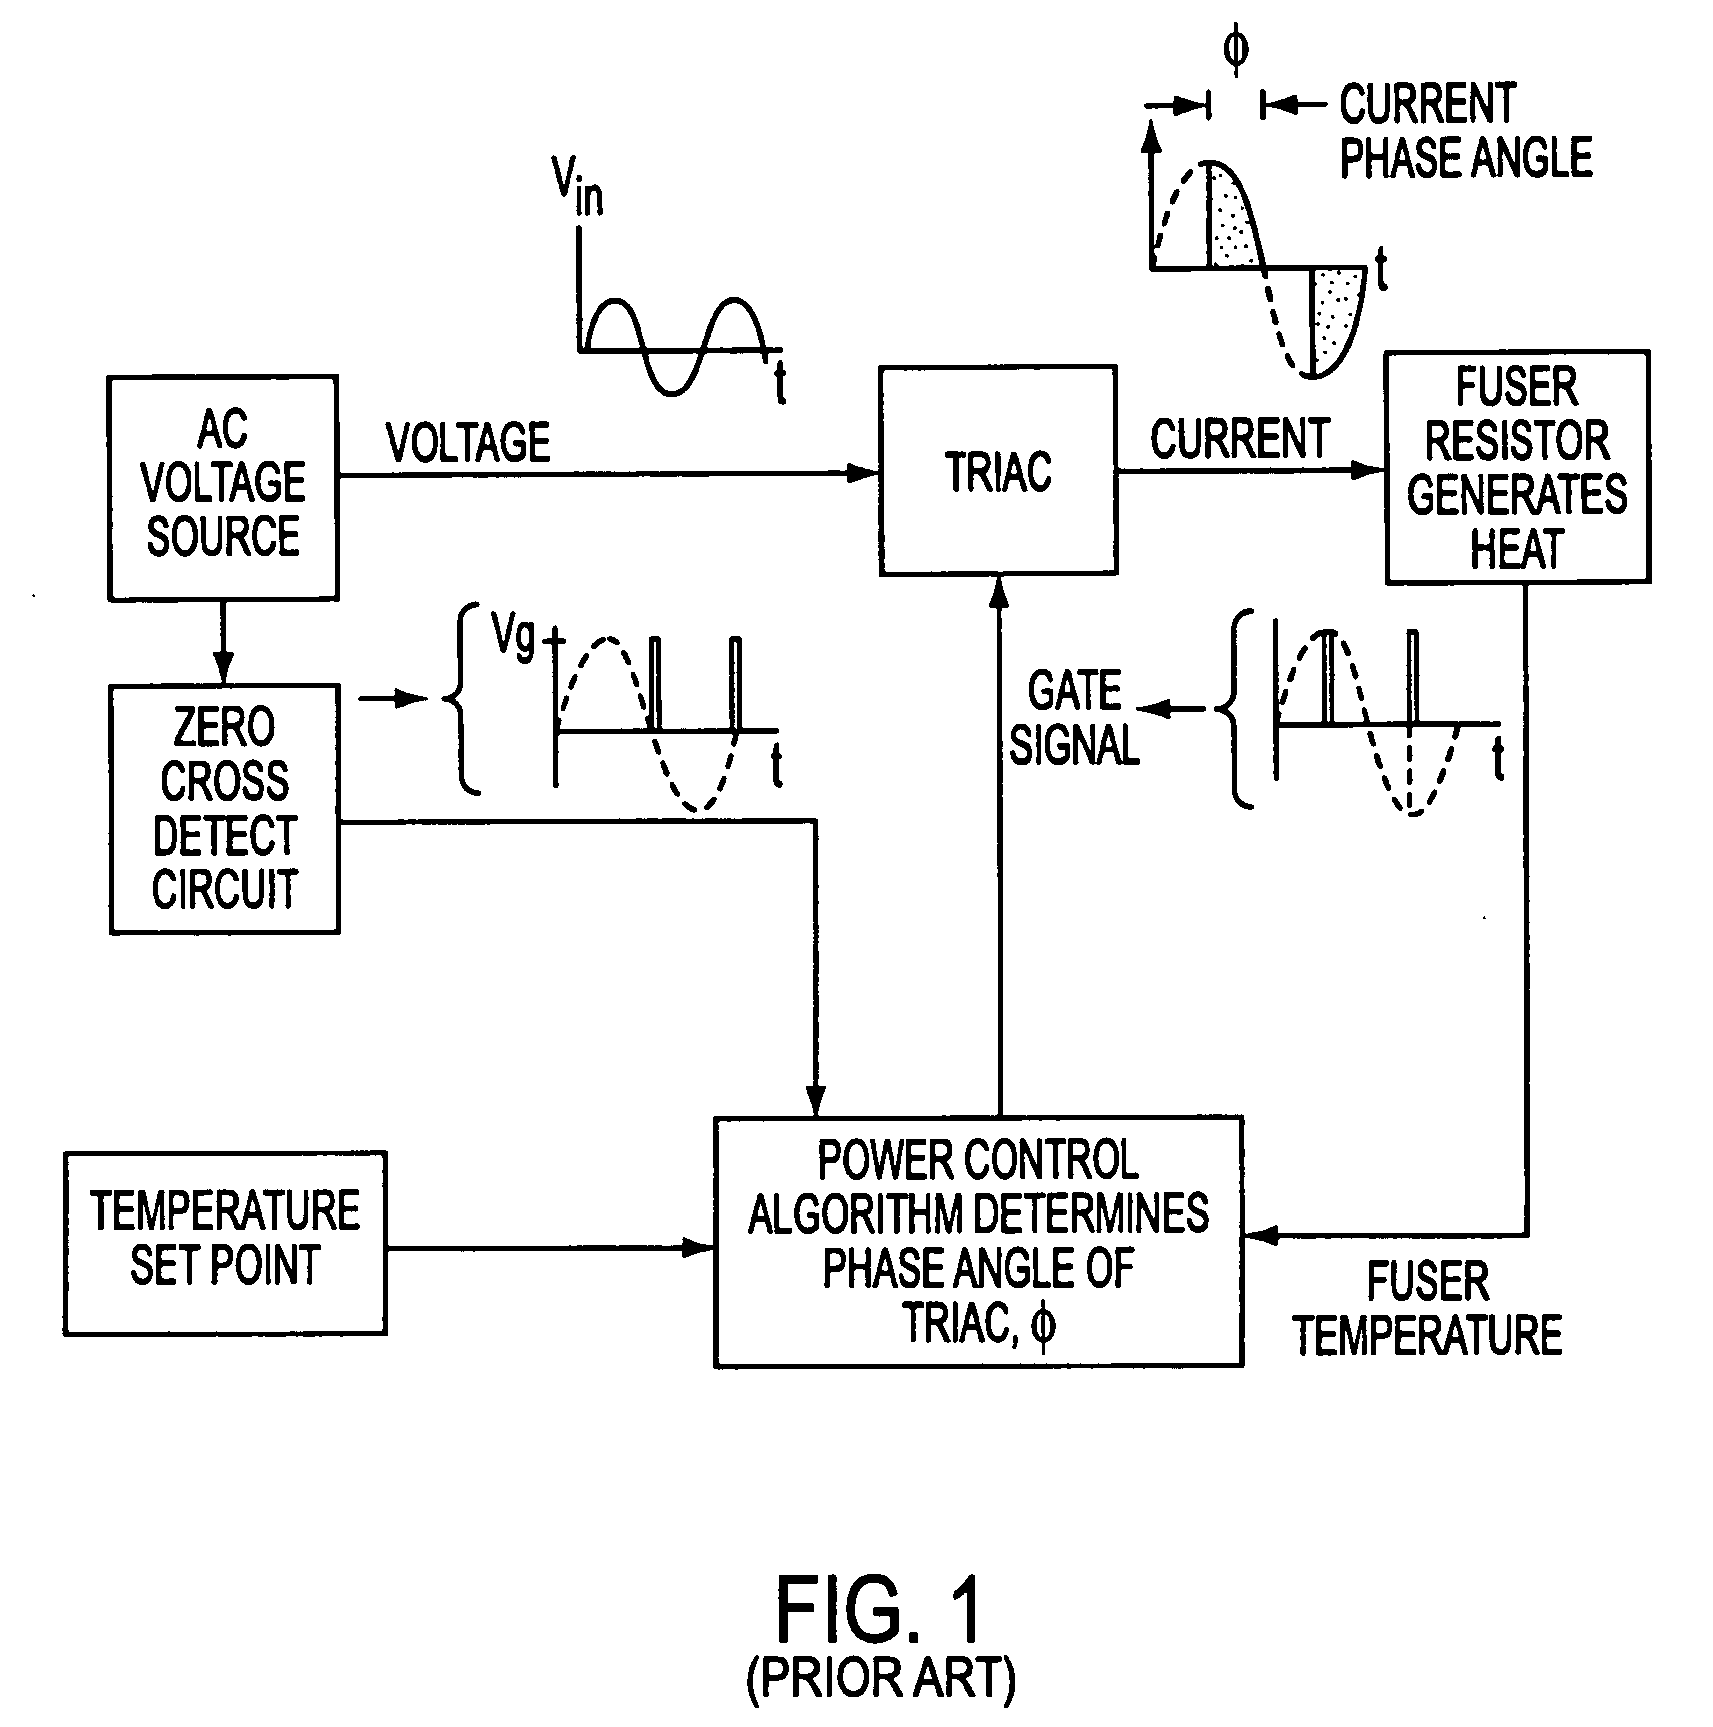 Circuit for controlling a fusing system